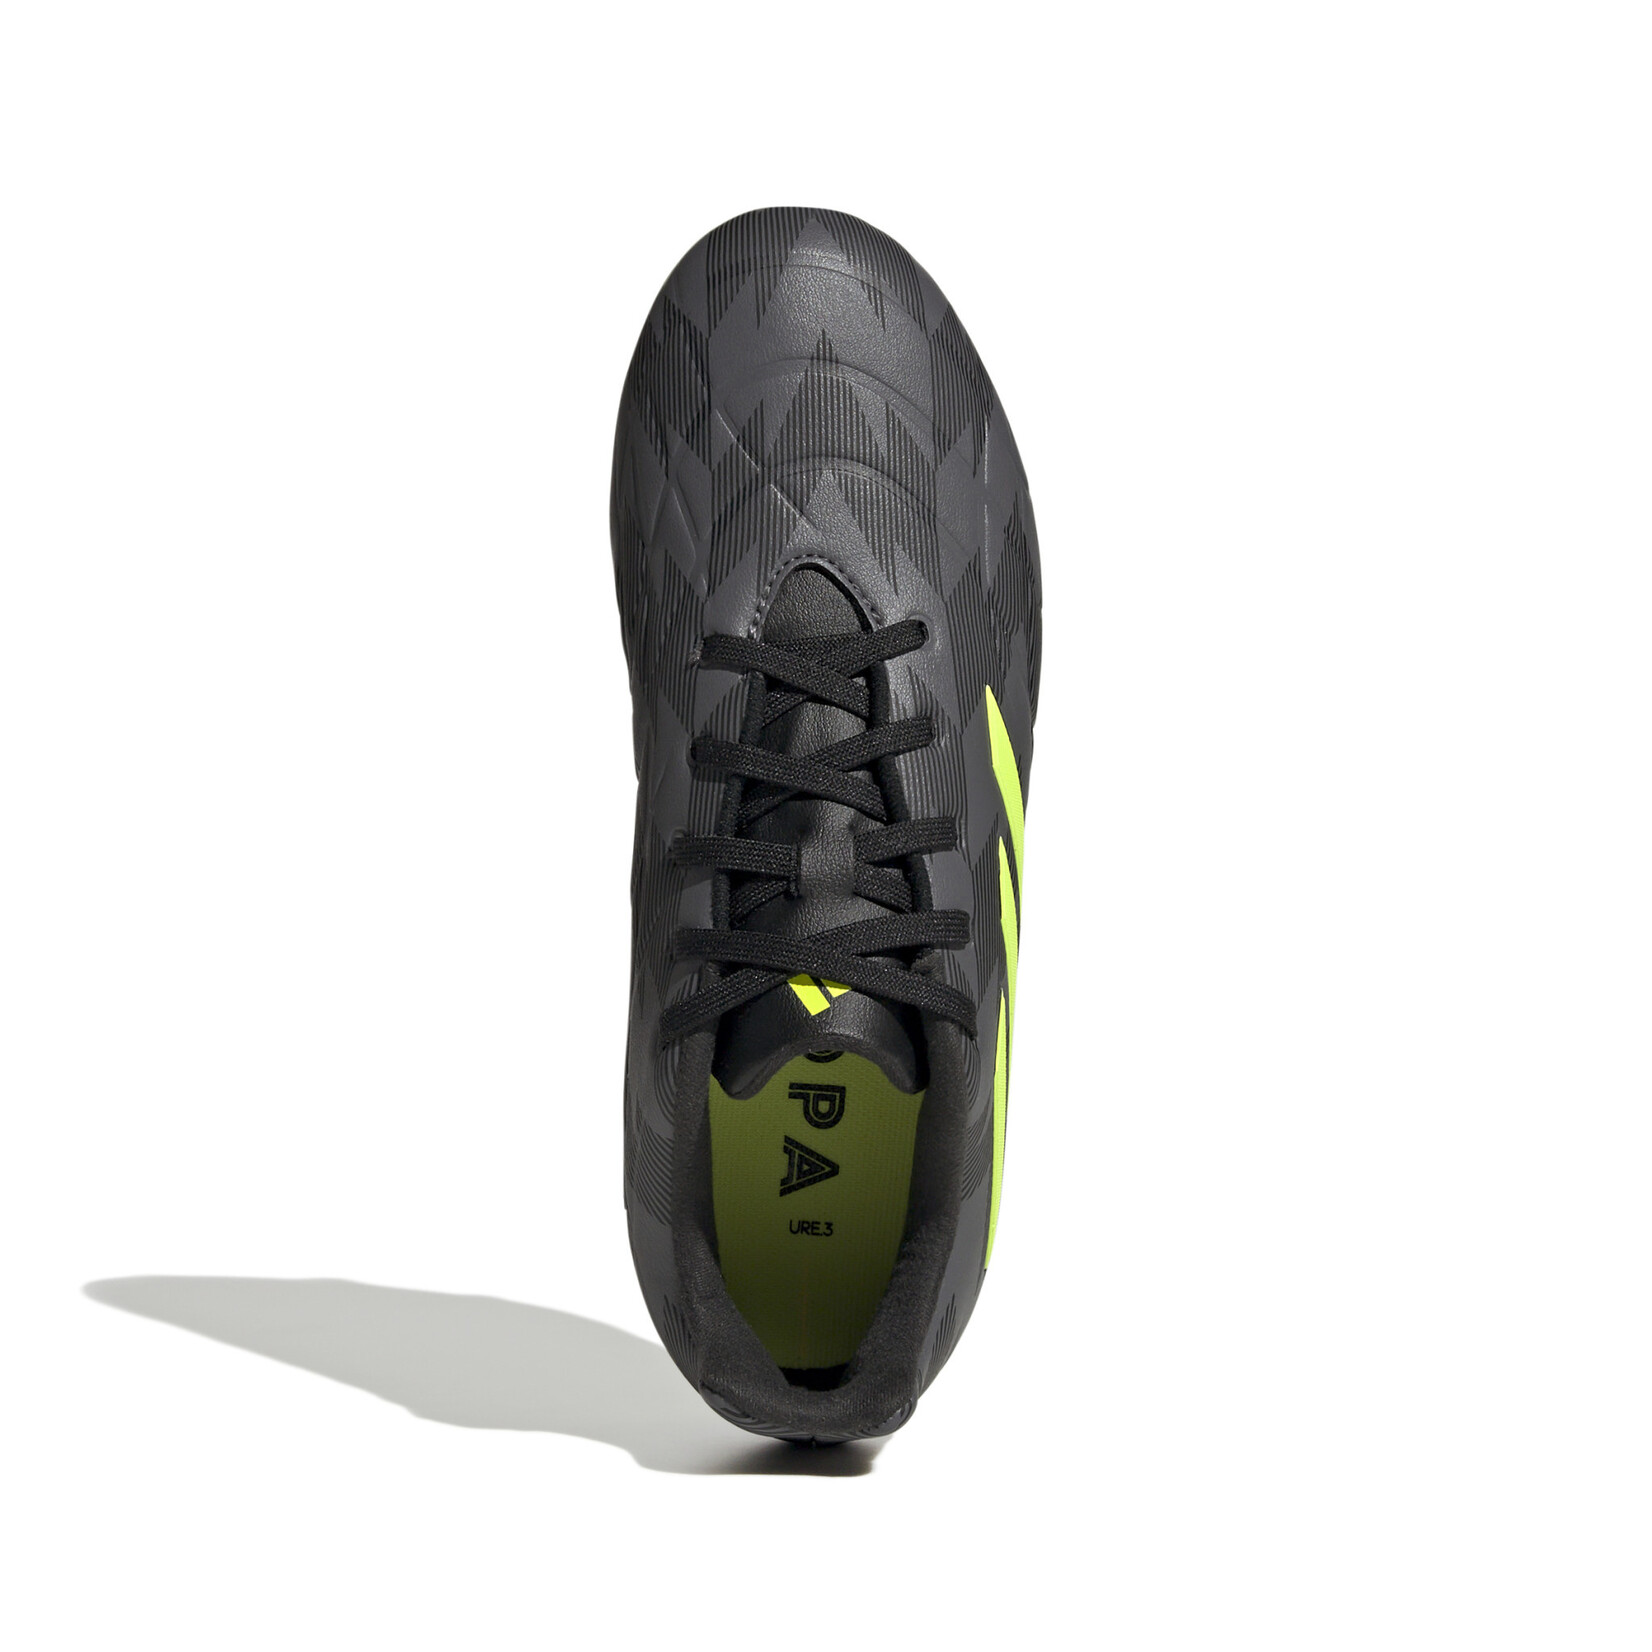 ADIDAS Copa Pure Injection.3 FG Jr (Black/Gray/Lime)